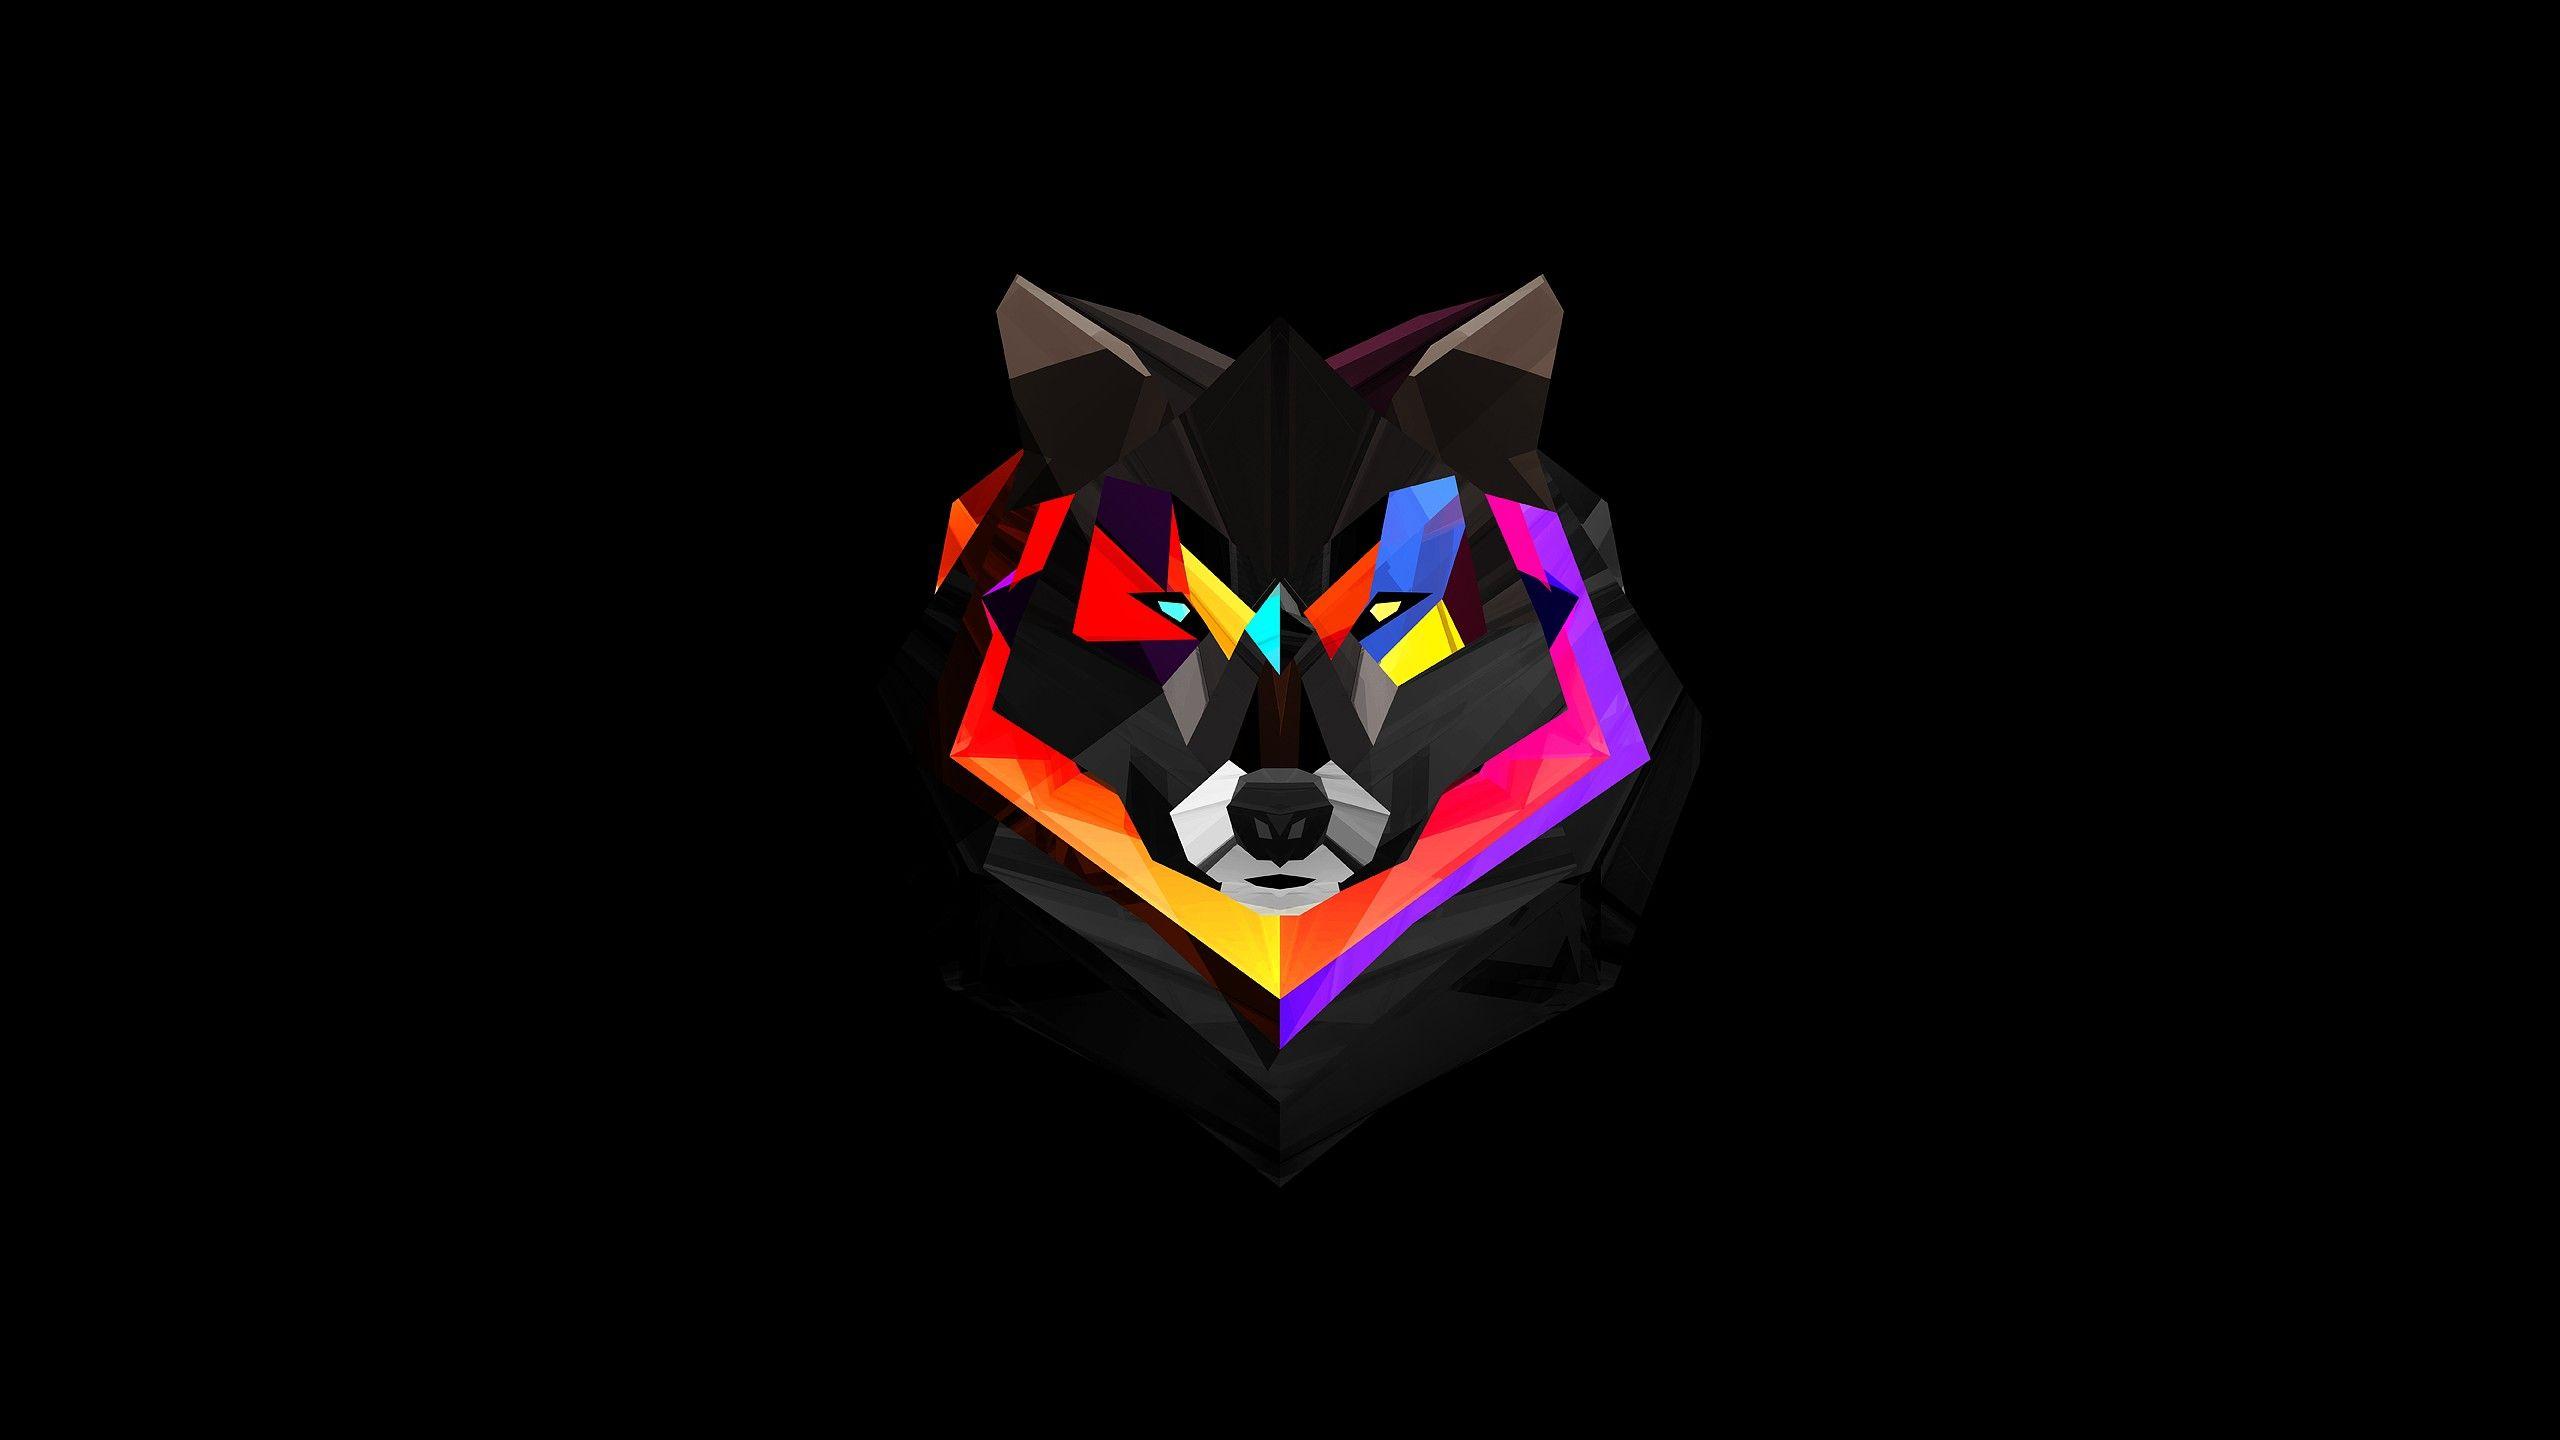 Awesome animals wallpaper. Polygon art, Wolf wallpaper, Abstract